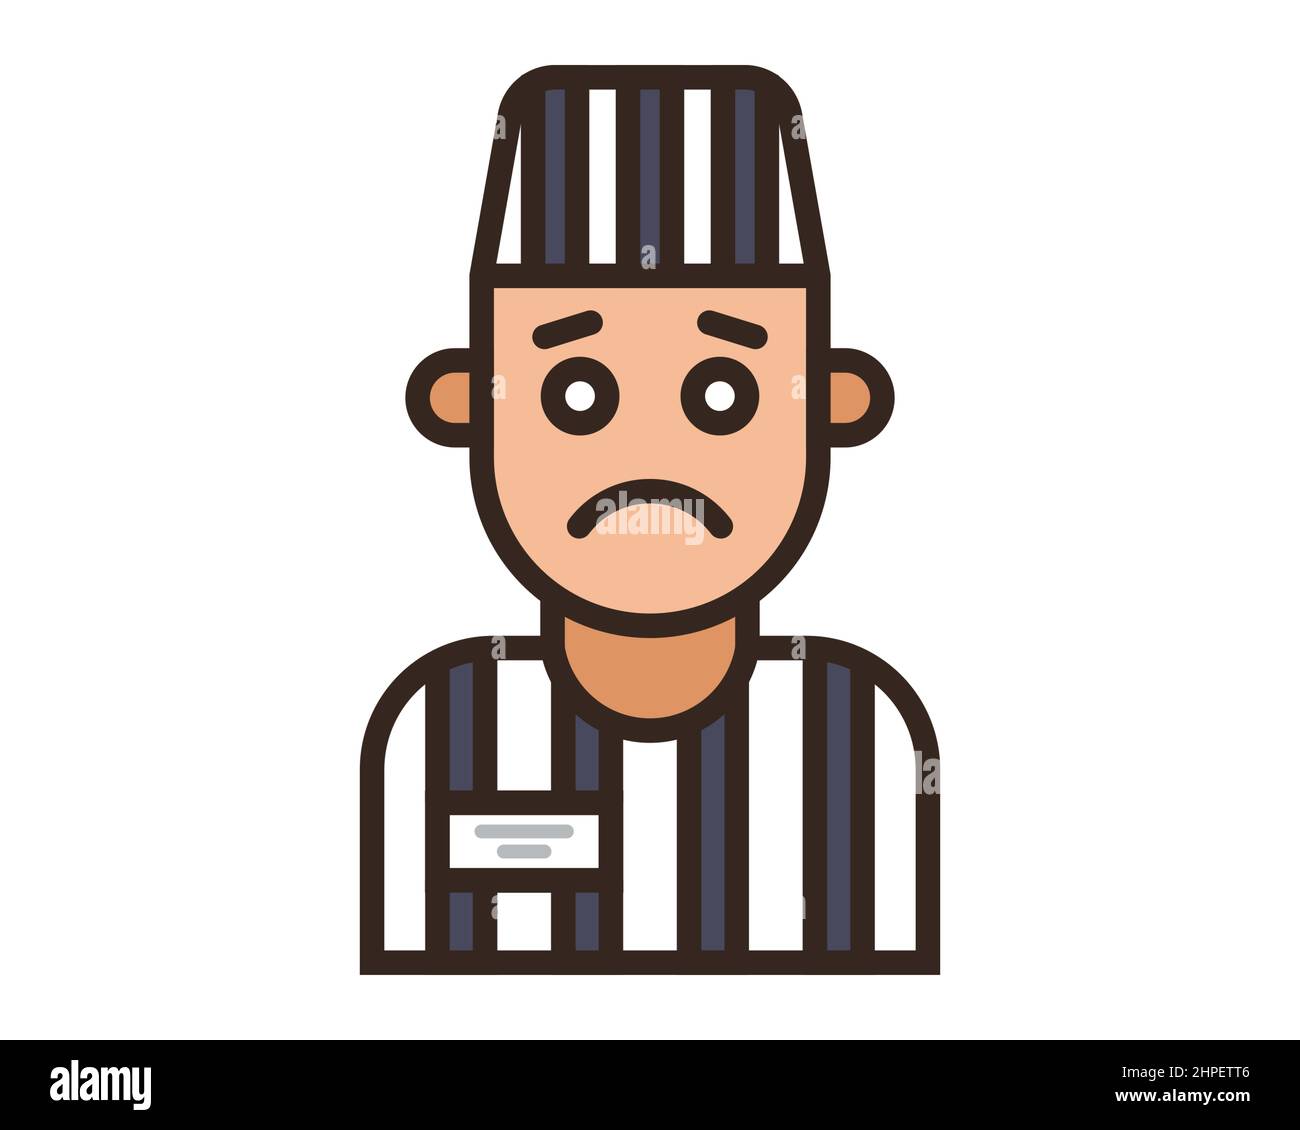 color icon of a prisoner in a striped uniform. Flat character vector illustration. Stock Vector